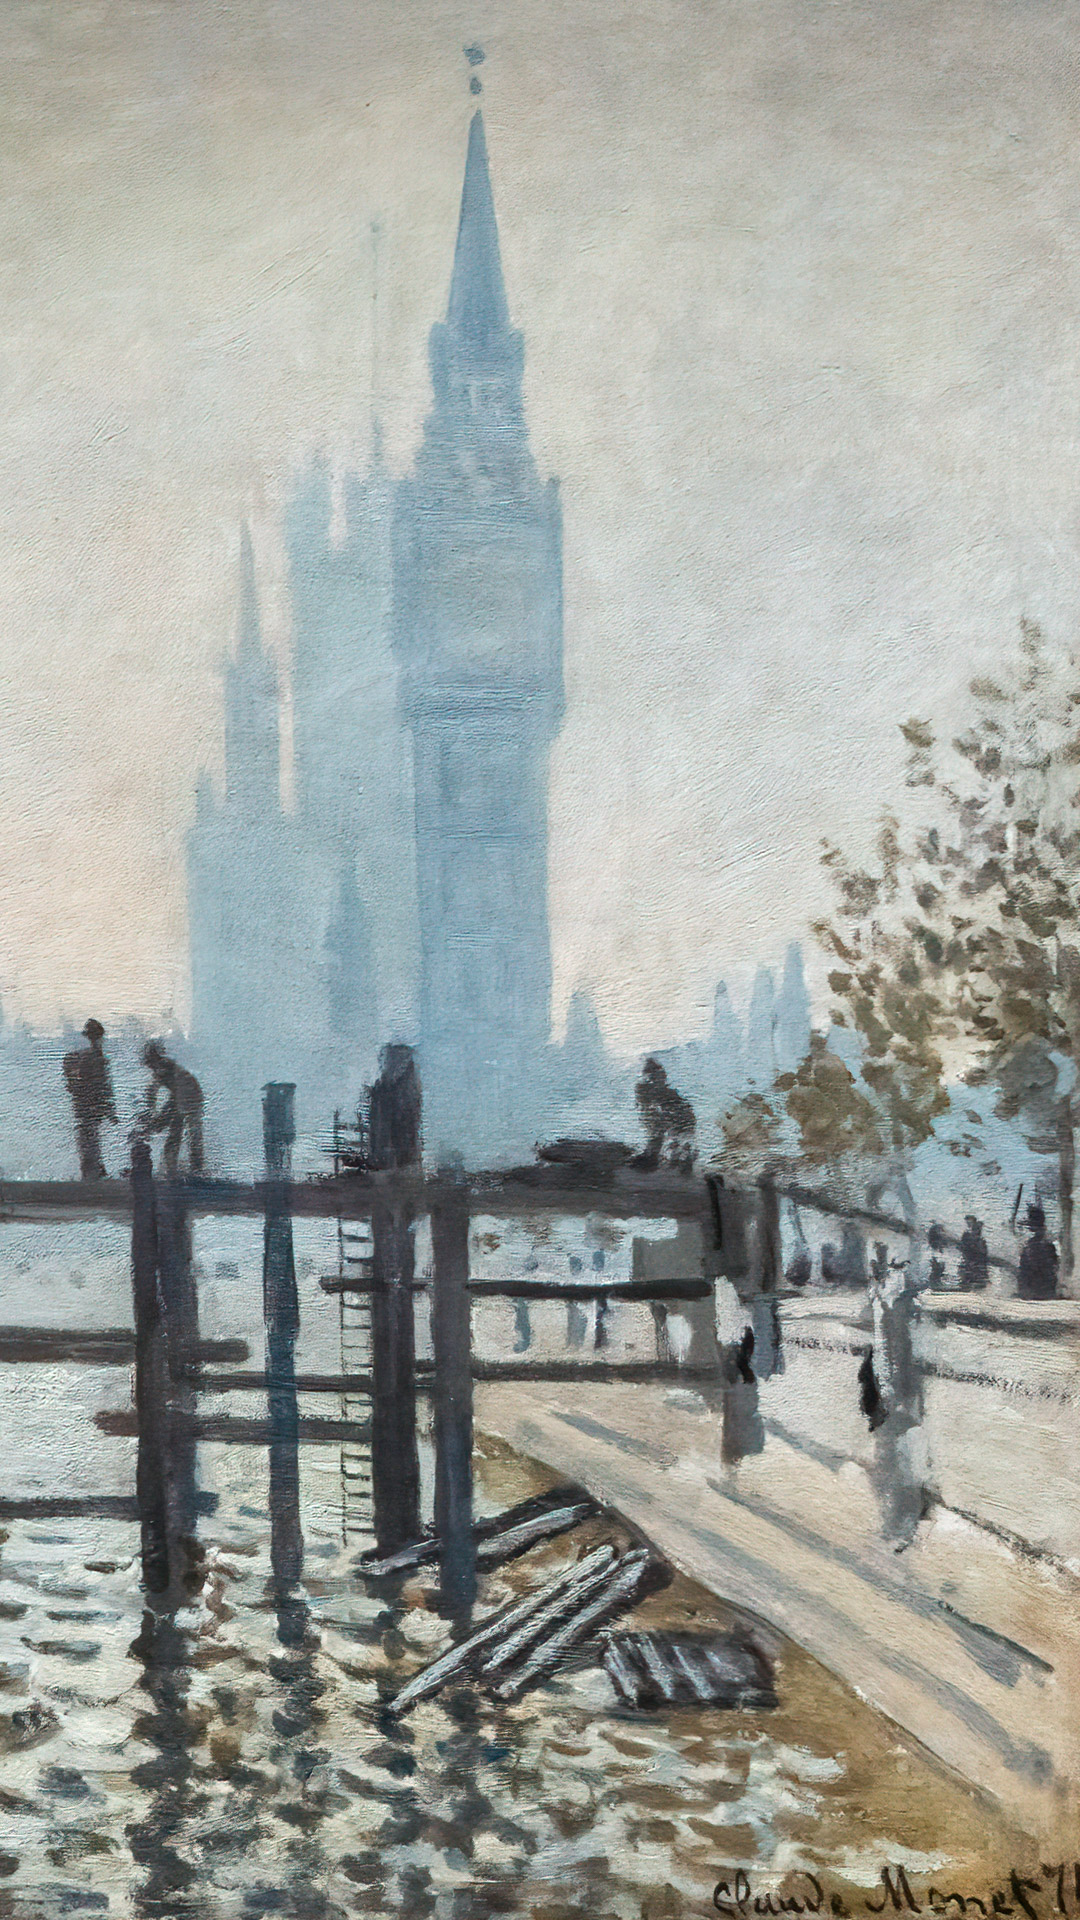 Capture the enchanting spirit of London through Monet's eyes, transforming your iPhone into a digital canvas of urban beauty.